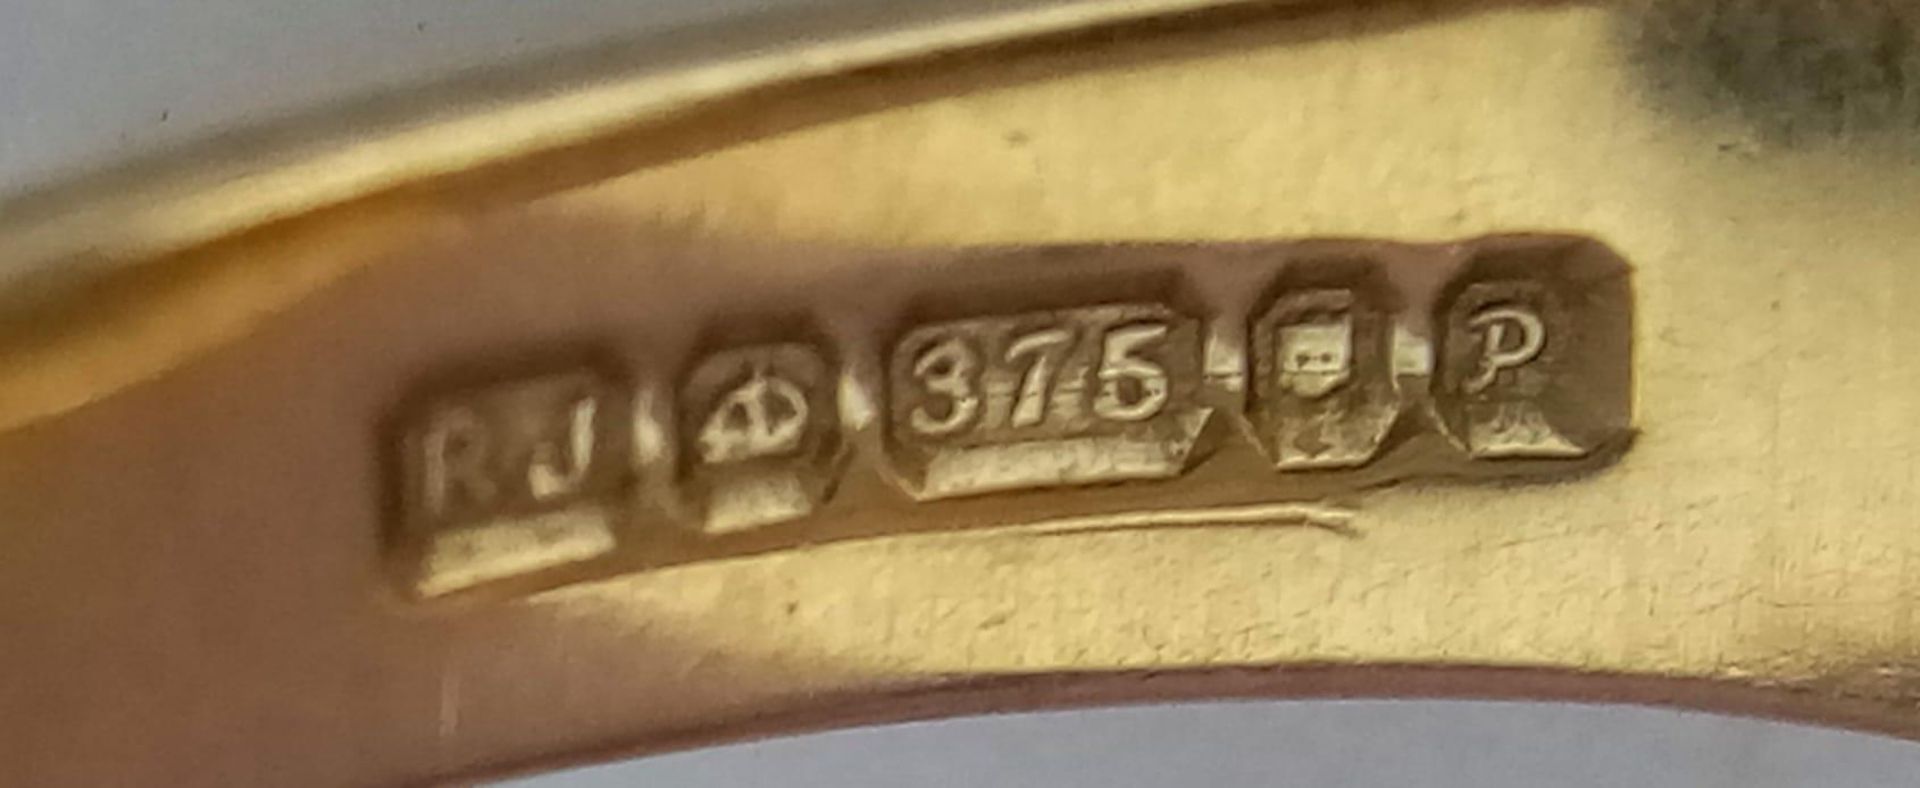 A Vintage 9K Yellow Gold Signet Ring. Size Q 1/2. Full UK hallmarks. 3.42g weight. - Image 5 of 5